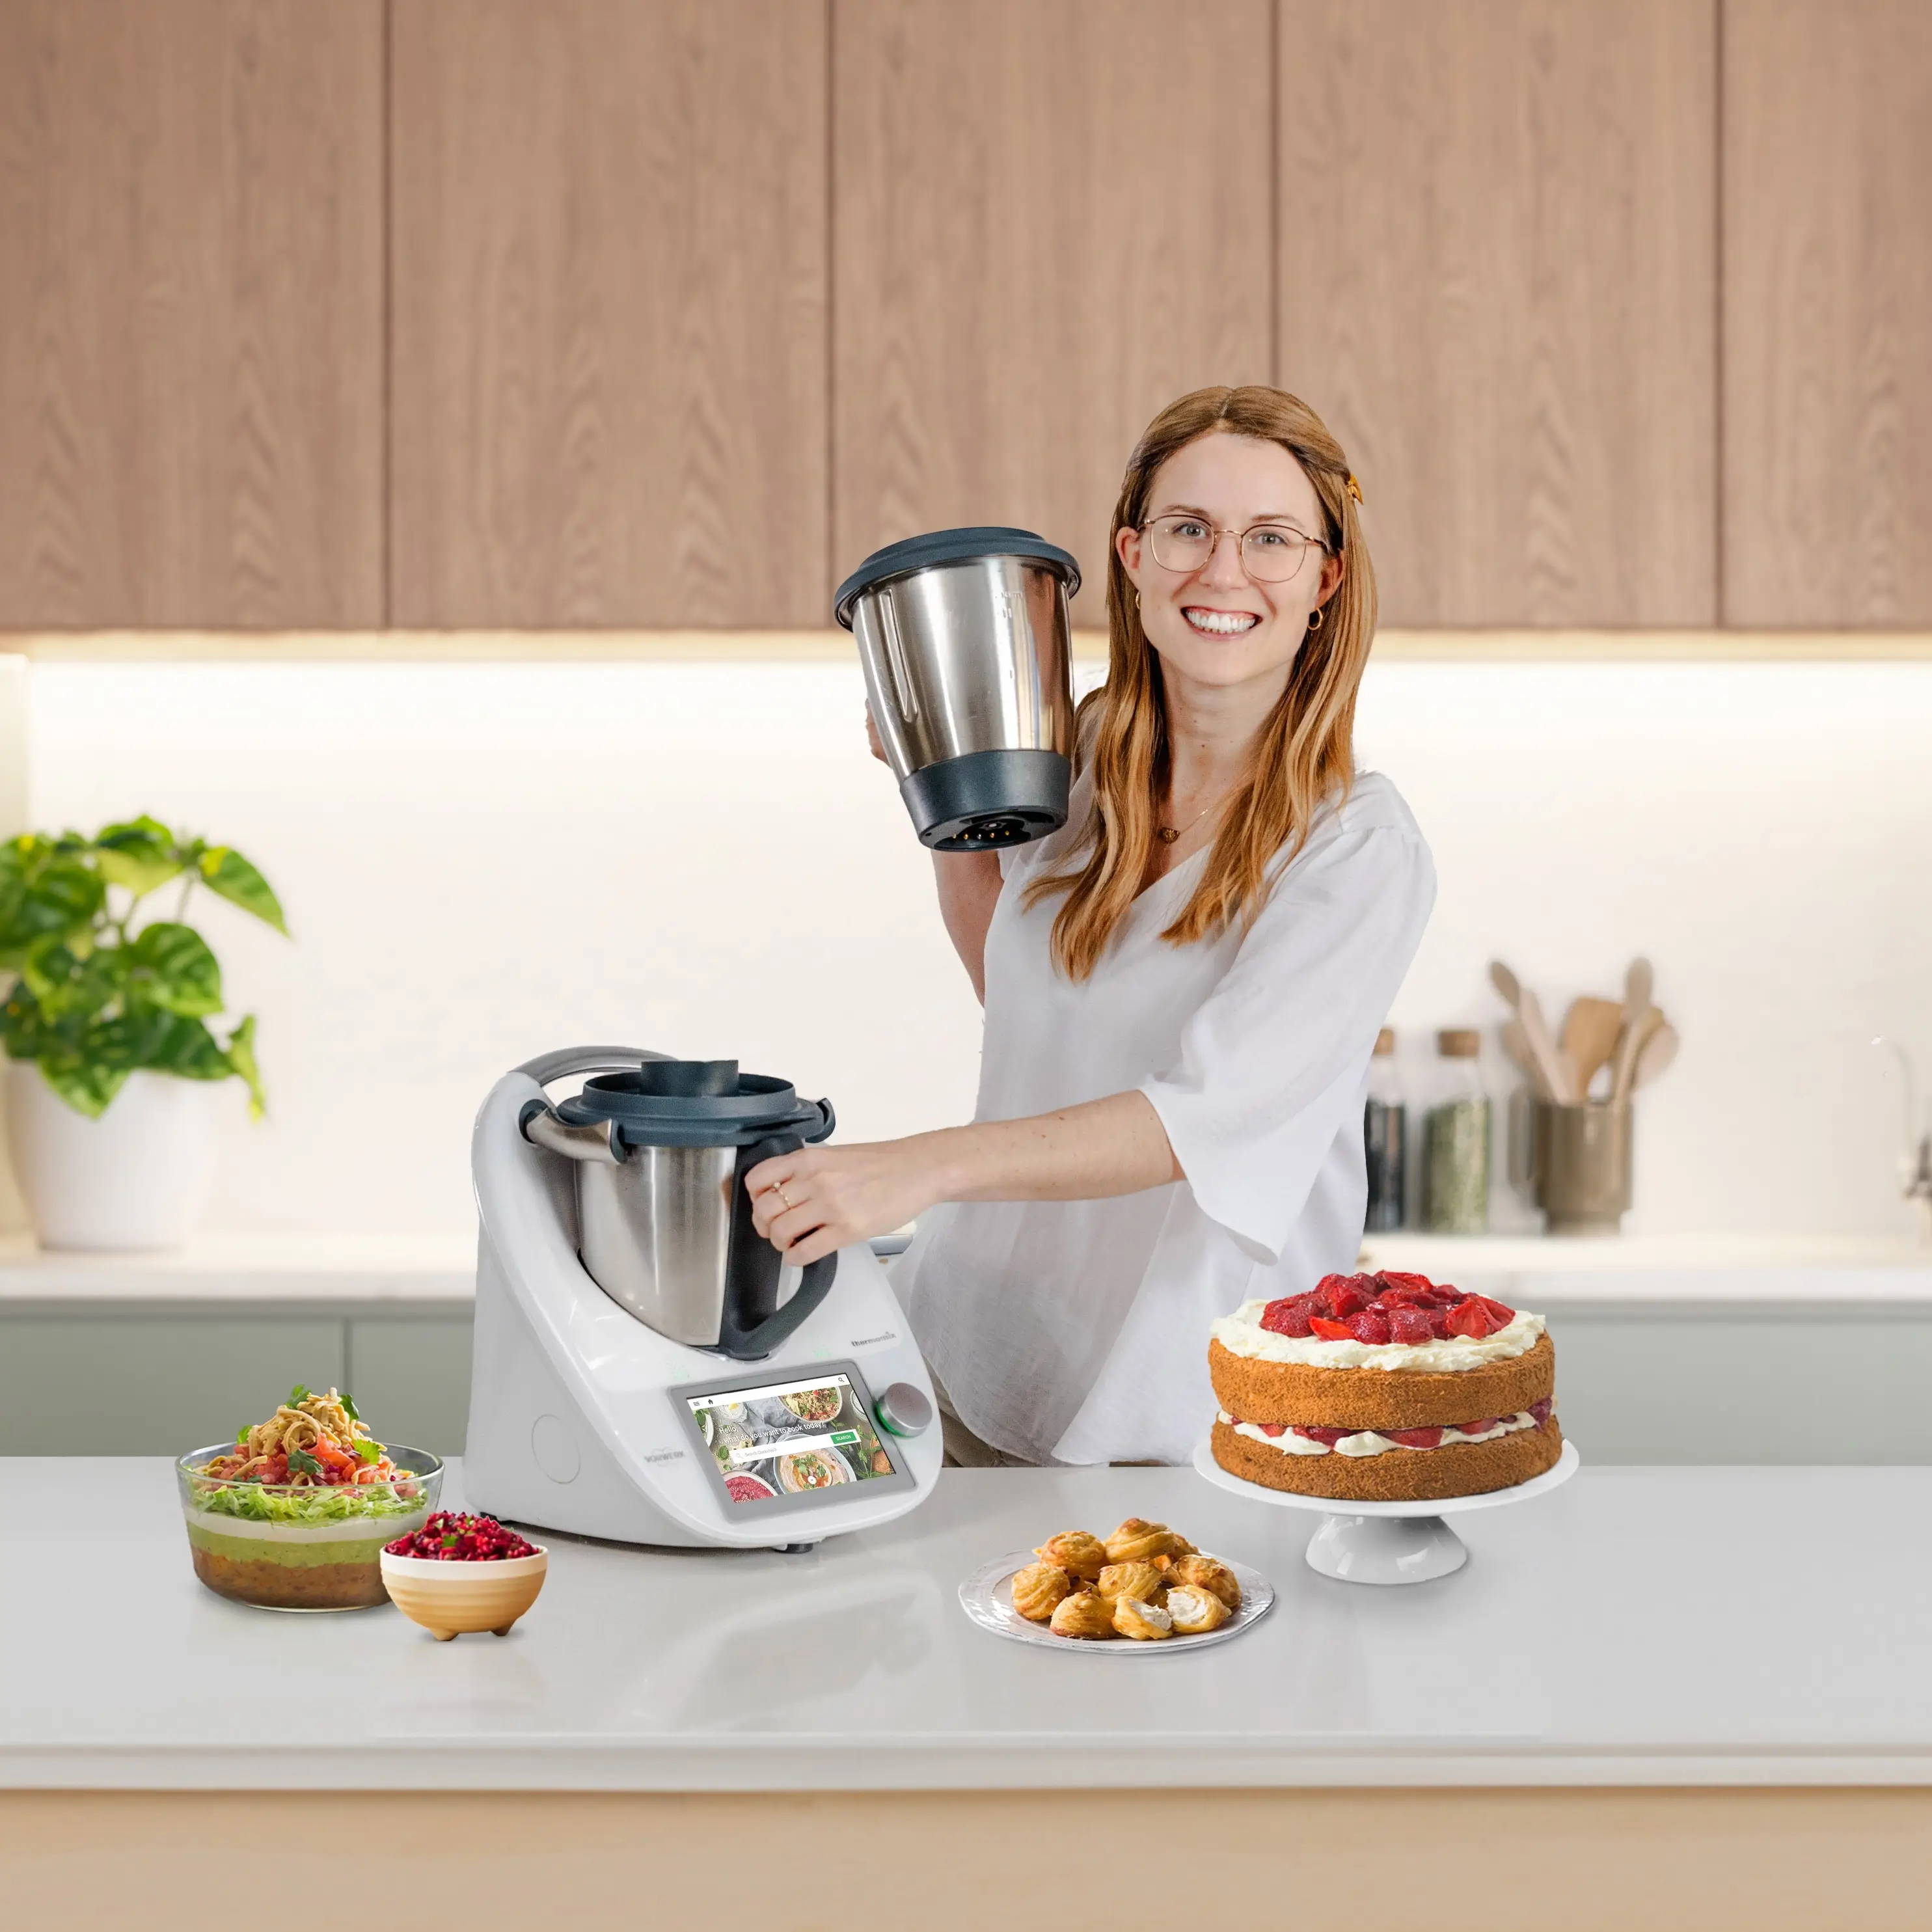 Thermomix deal, free Vac-U-Seal when you purchase a TM6.